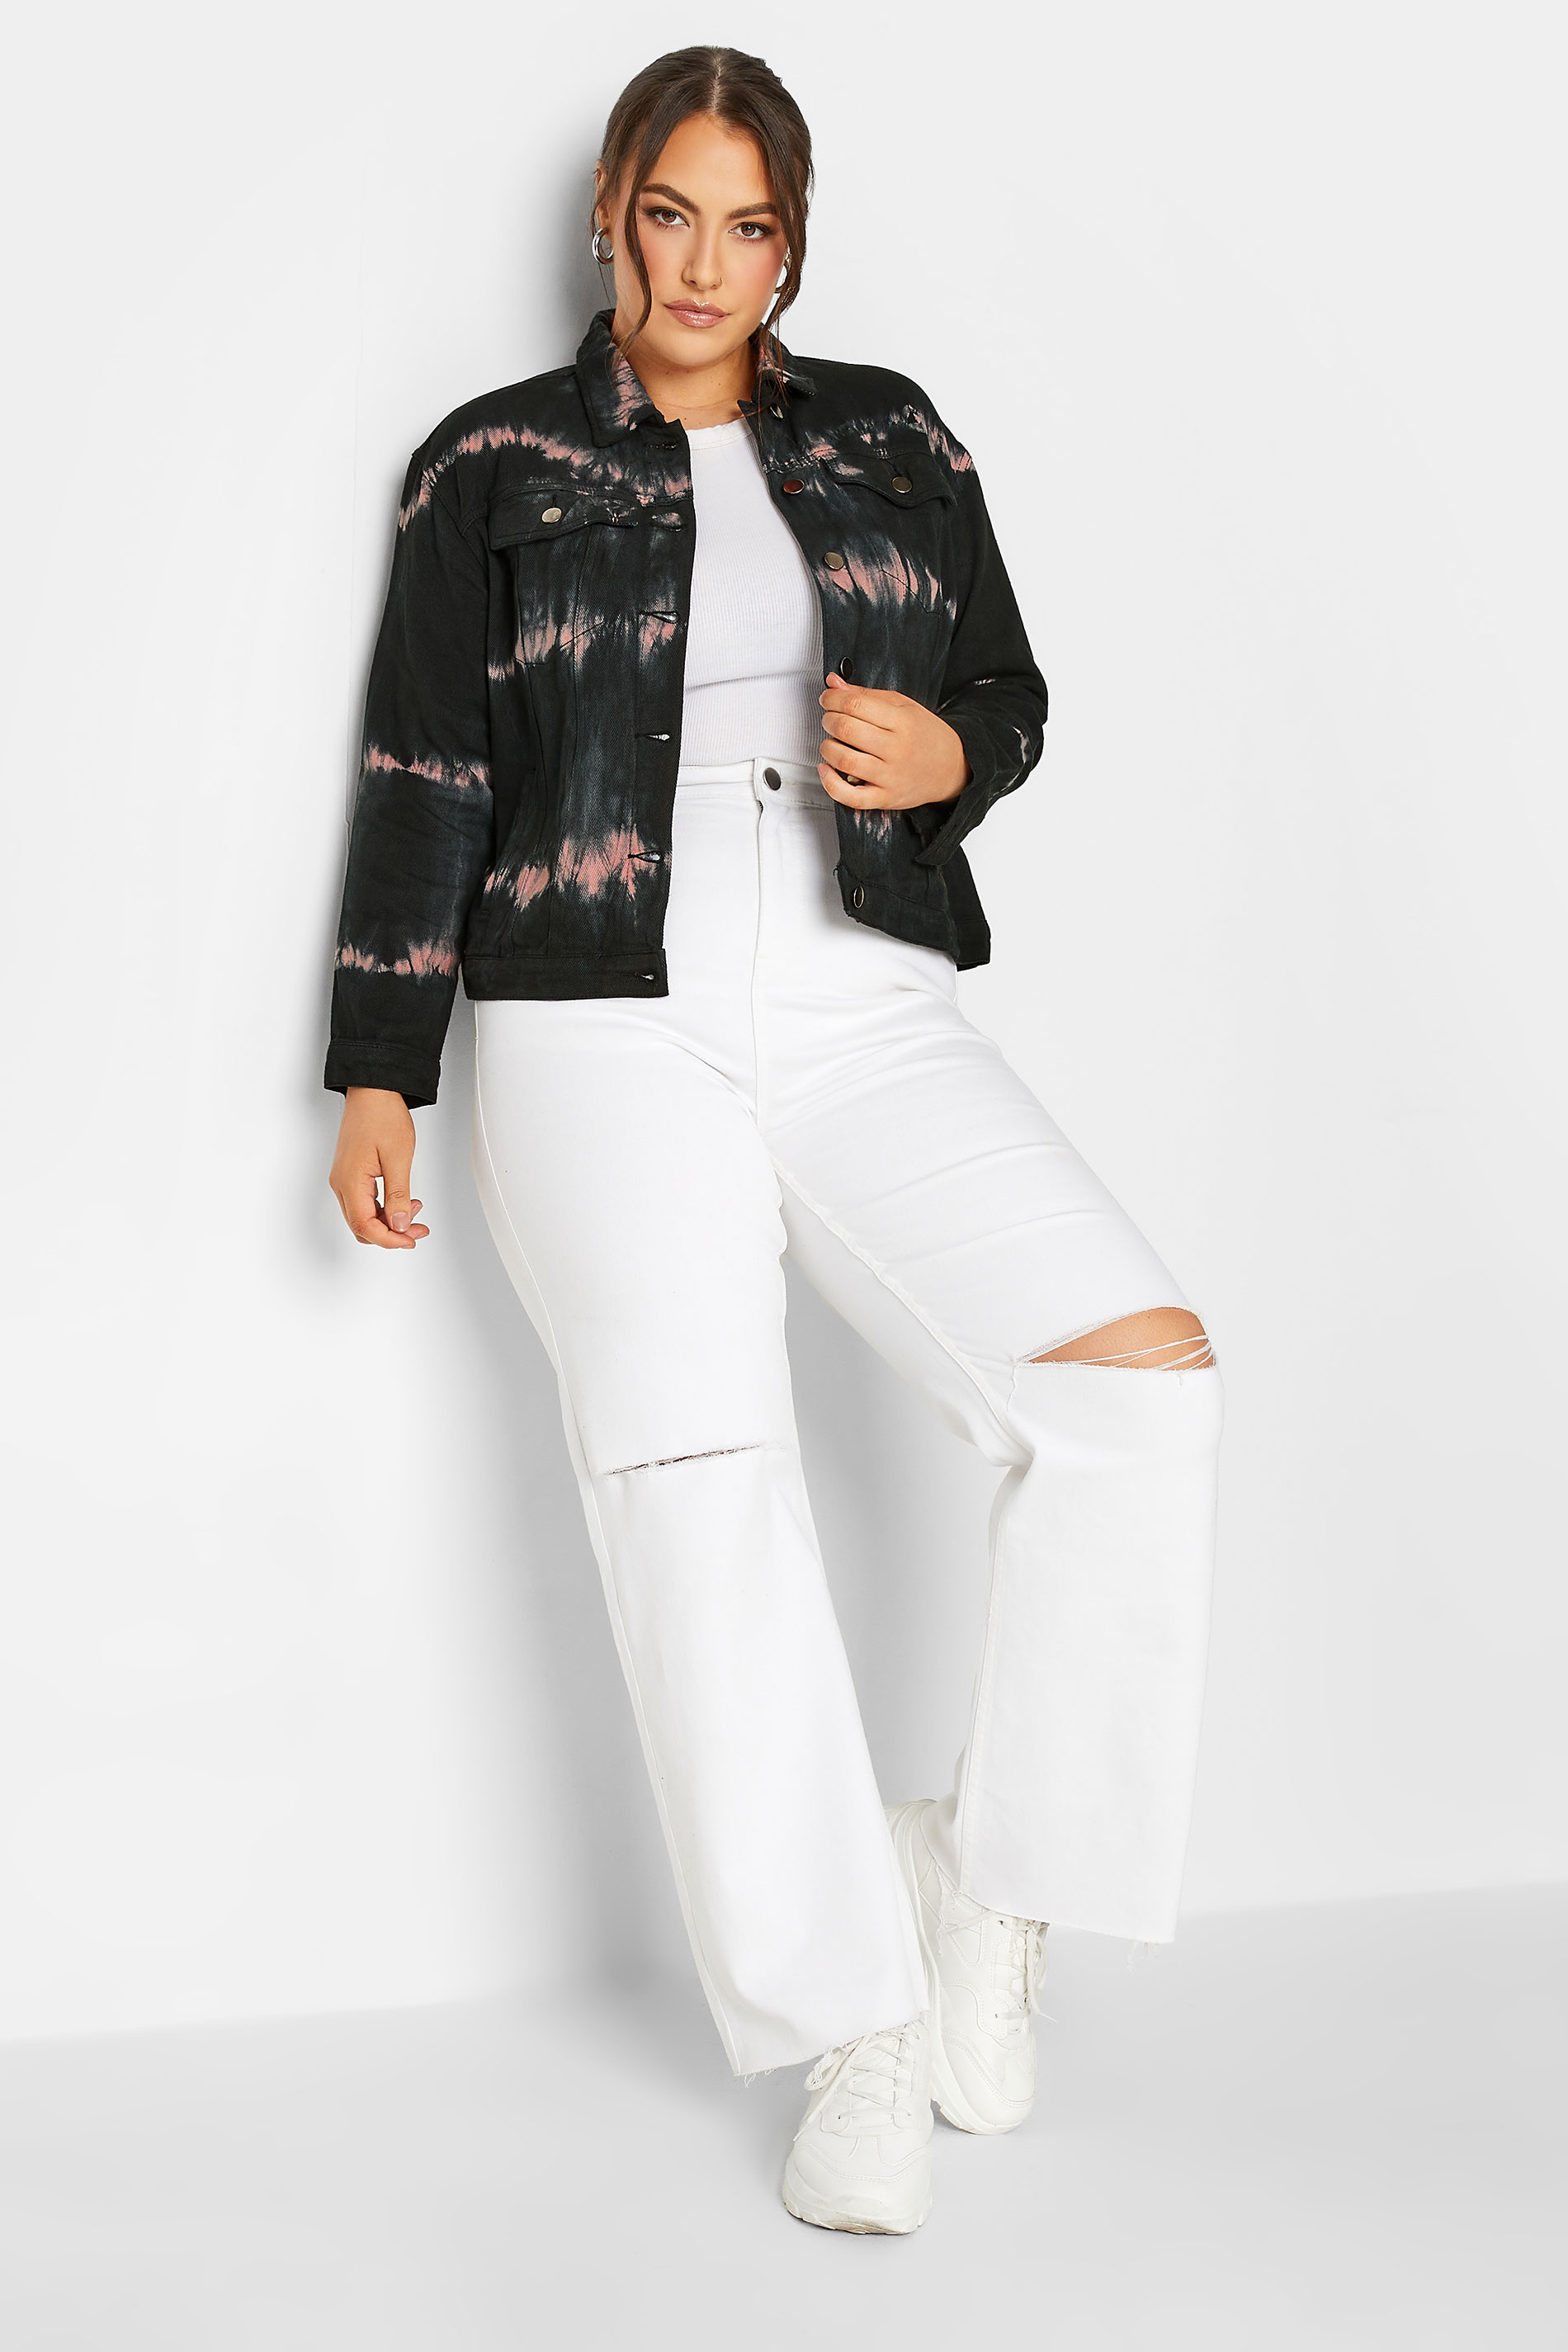 LIMITED COLLECTION Plus Size Black Tie Dye Denim Jacket | Yours Clothing 2